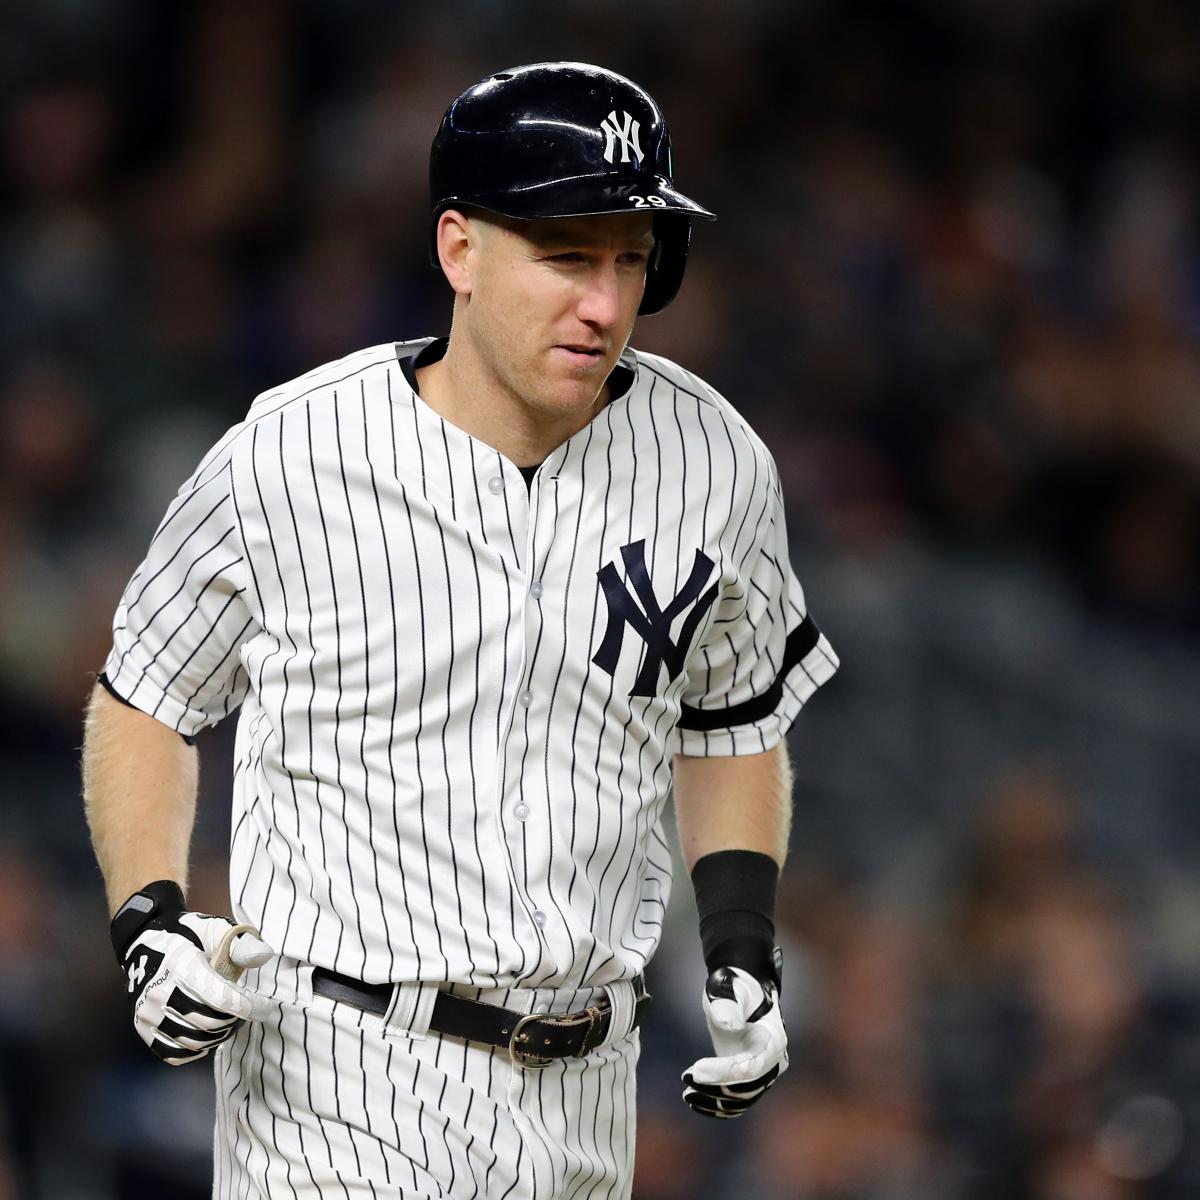 Report: Todd Frazier, Mets Agree to 2-Year, $17M Contract